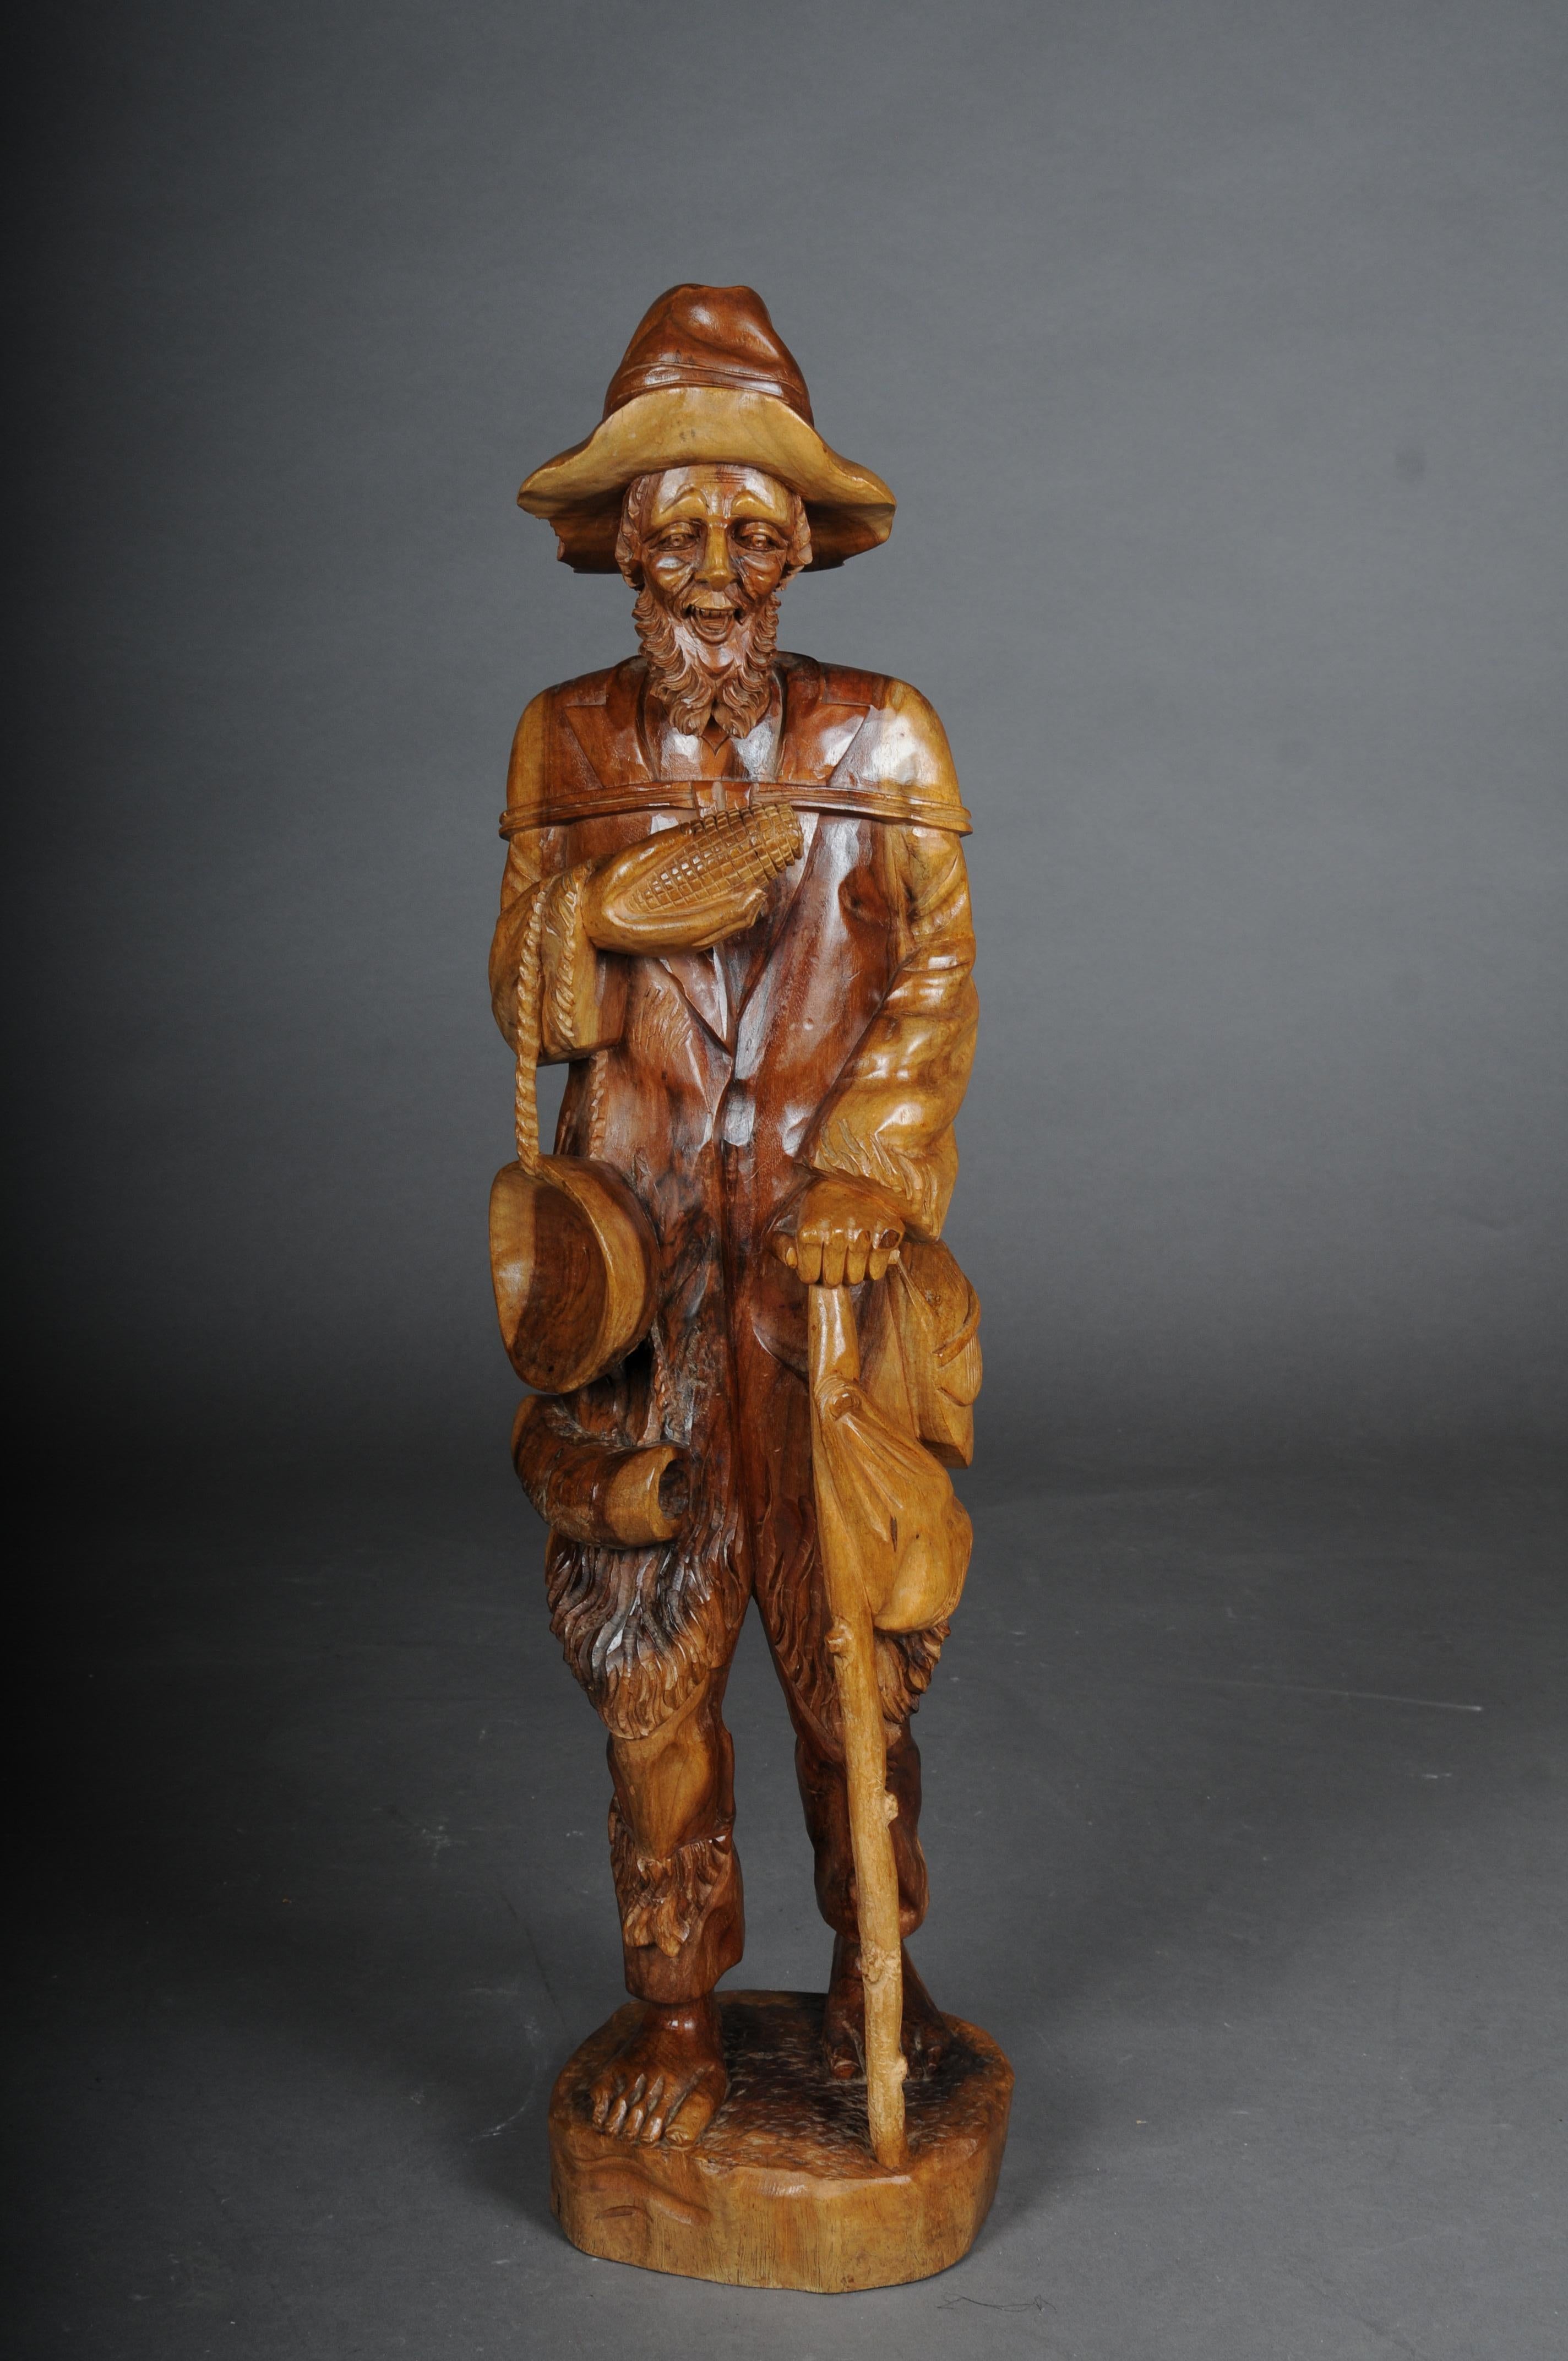 20th Century wooden sculpture Walker with corn on the cob, South German

Solid lime wood. Finely carved figure depicting an old ranger with a child on his shoulders and a dog
Southern Germany/Tyrol 20th century